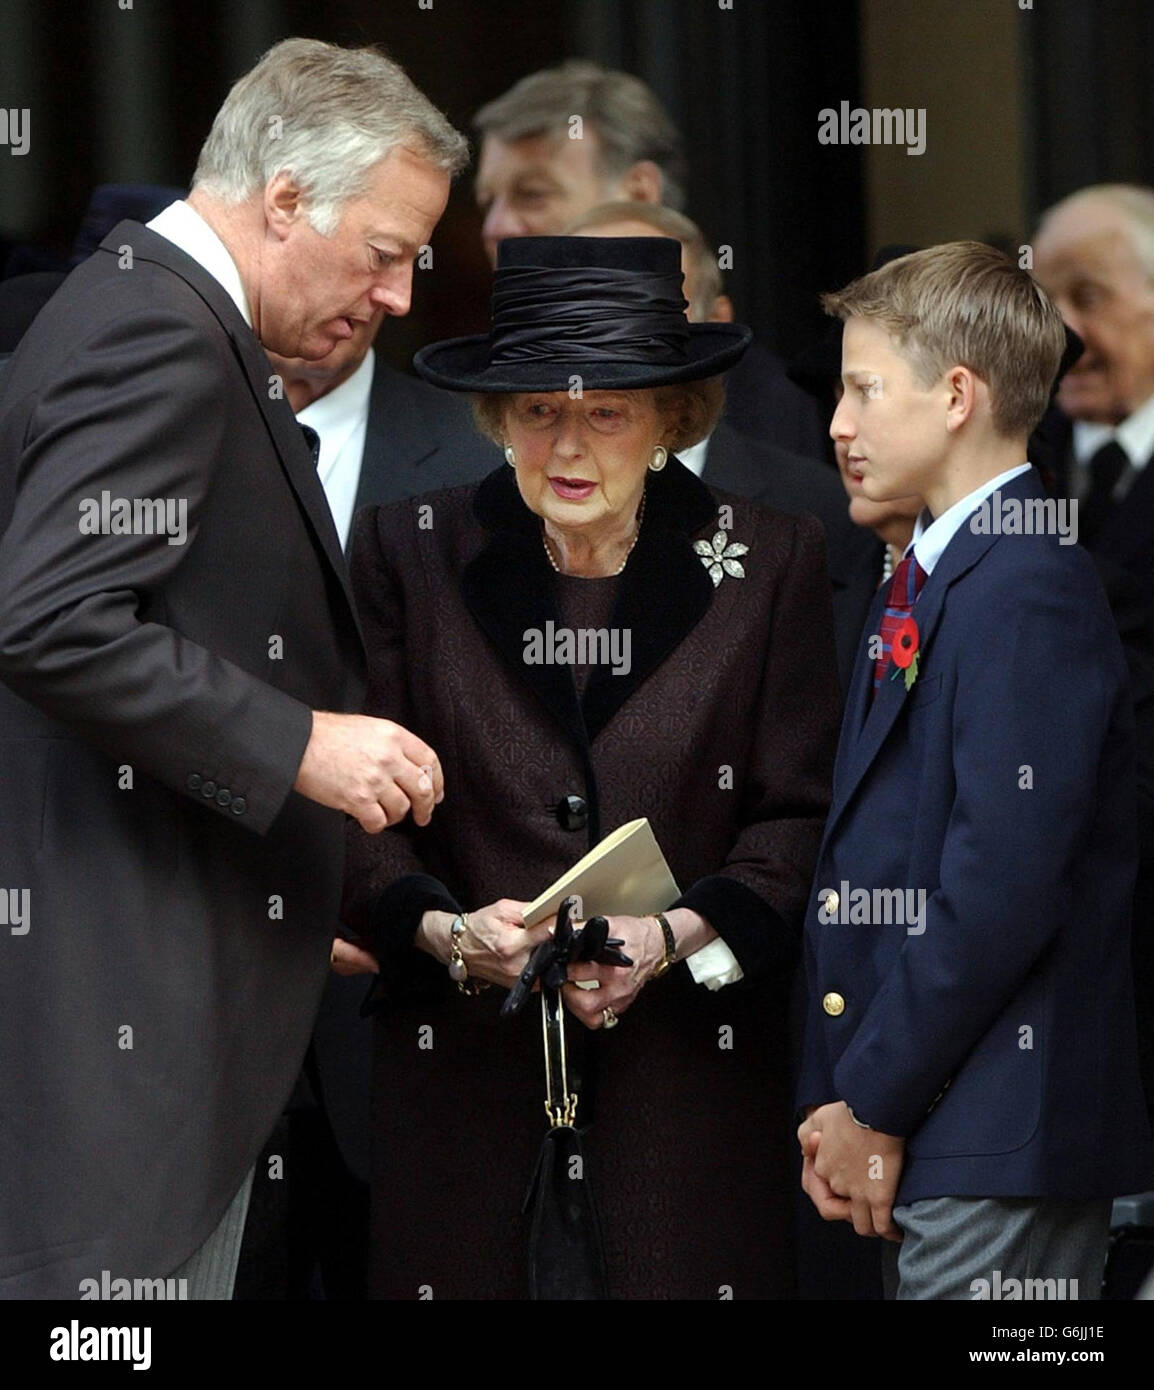 Former Prime Minister Lady Thatcher is comforted by her grandson Michael Thatcher and her son Mark outside the memorial service of her late husband, Sir Denis Thatcher, in The Guards Chapel, Birdcage Walk, London. Sir Denis died in June, aged 88 having undergone major heart surgery some six months earlier, from which it was thought he had made a good recovery. Stock Photo